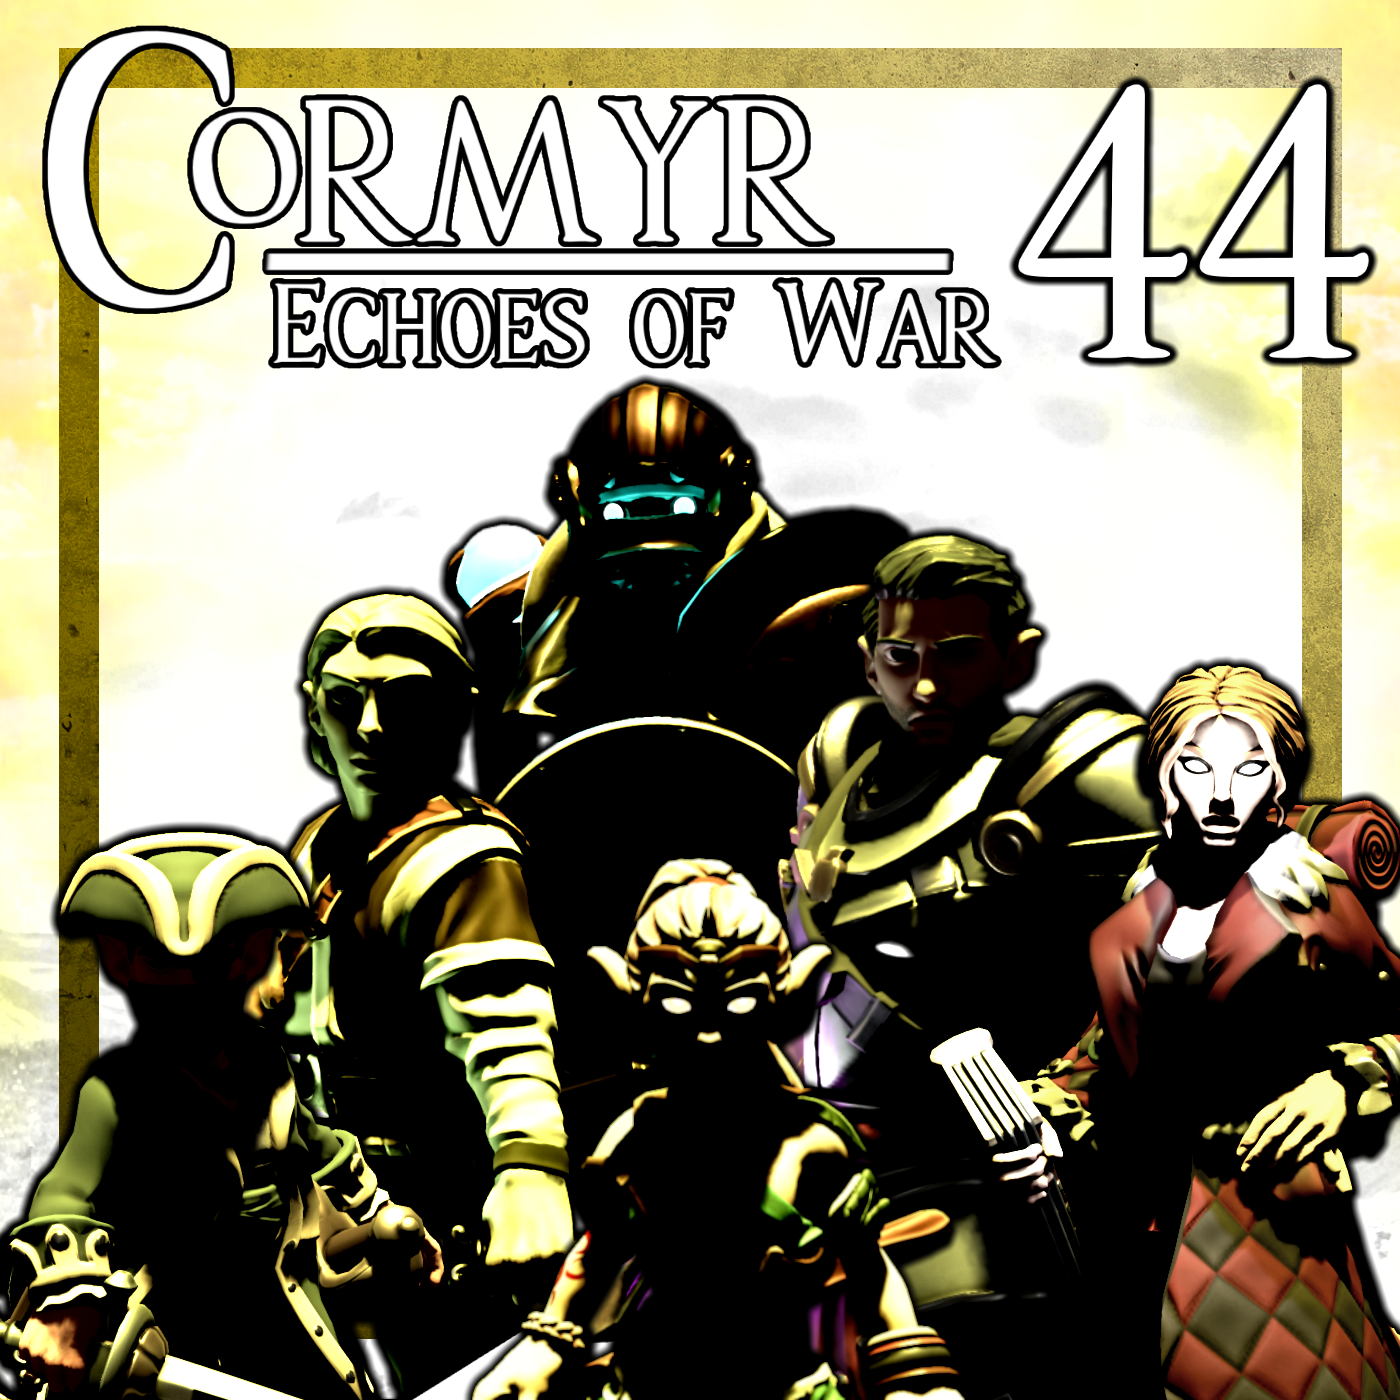 Cormyr: Echoes of War - Ep.44 - The End (FINALE)